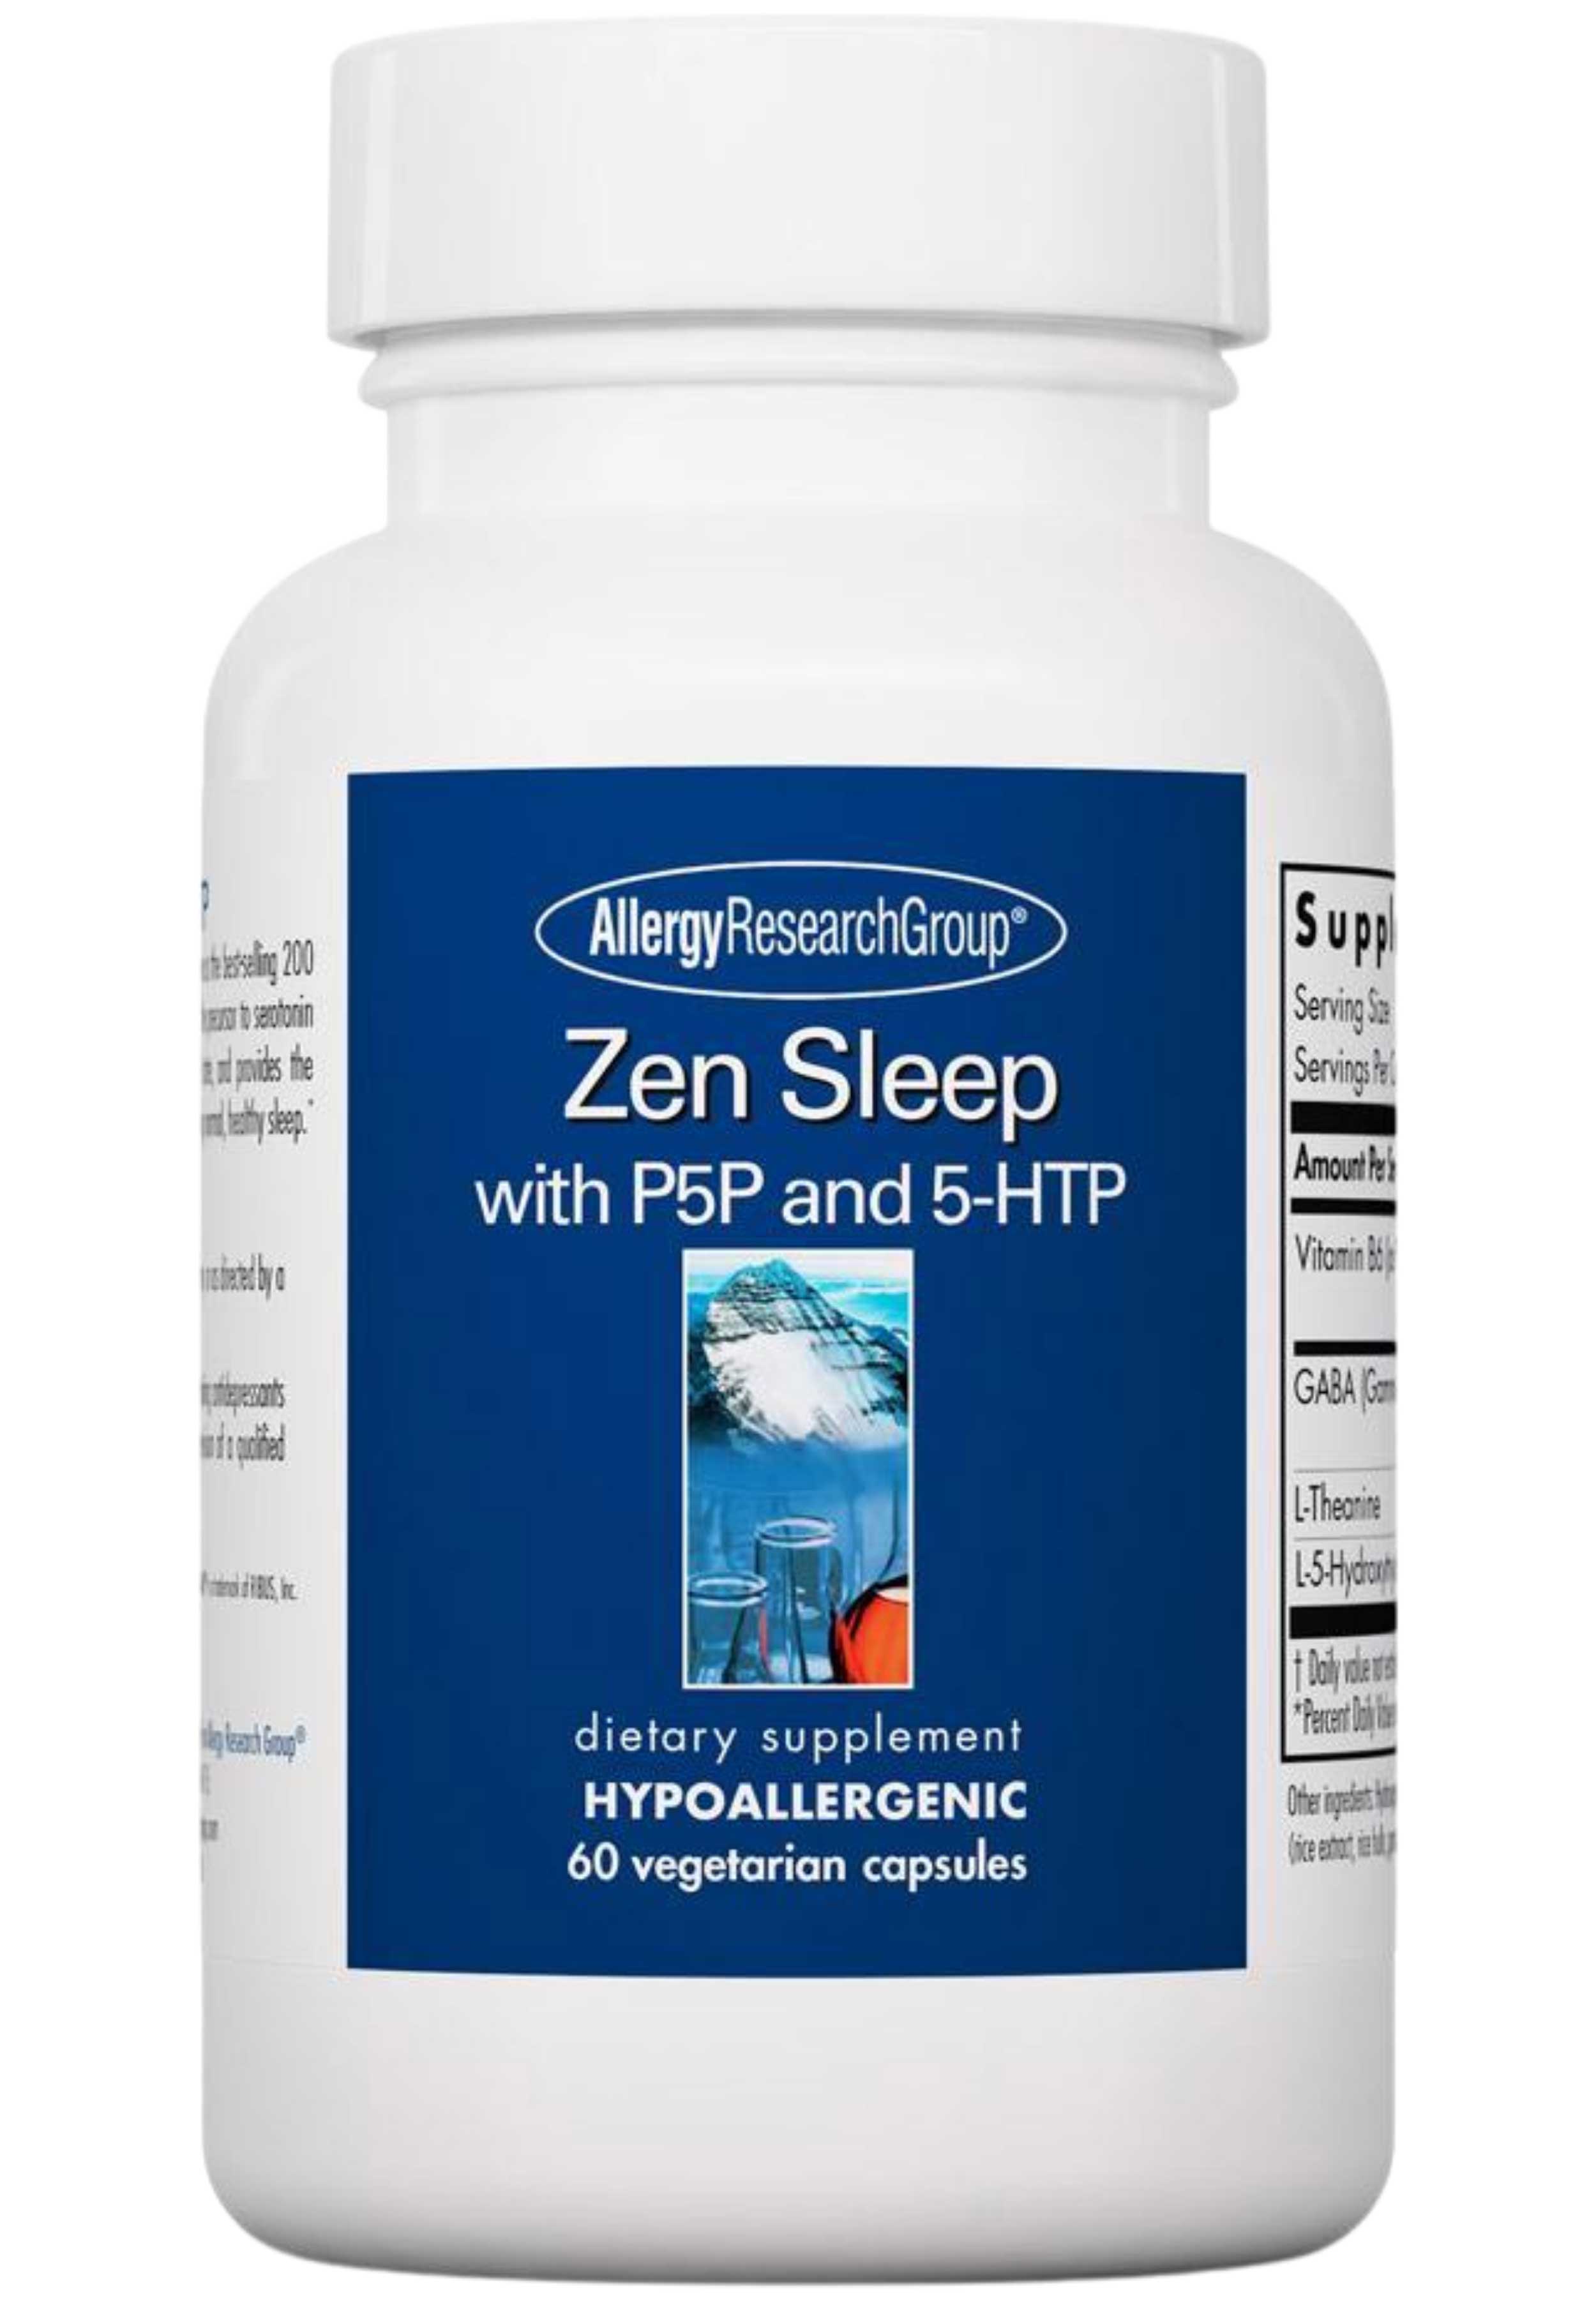 Allergy Research Group Zen Sleep with P5P and 5-HTP